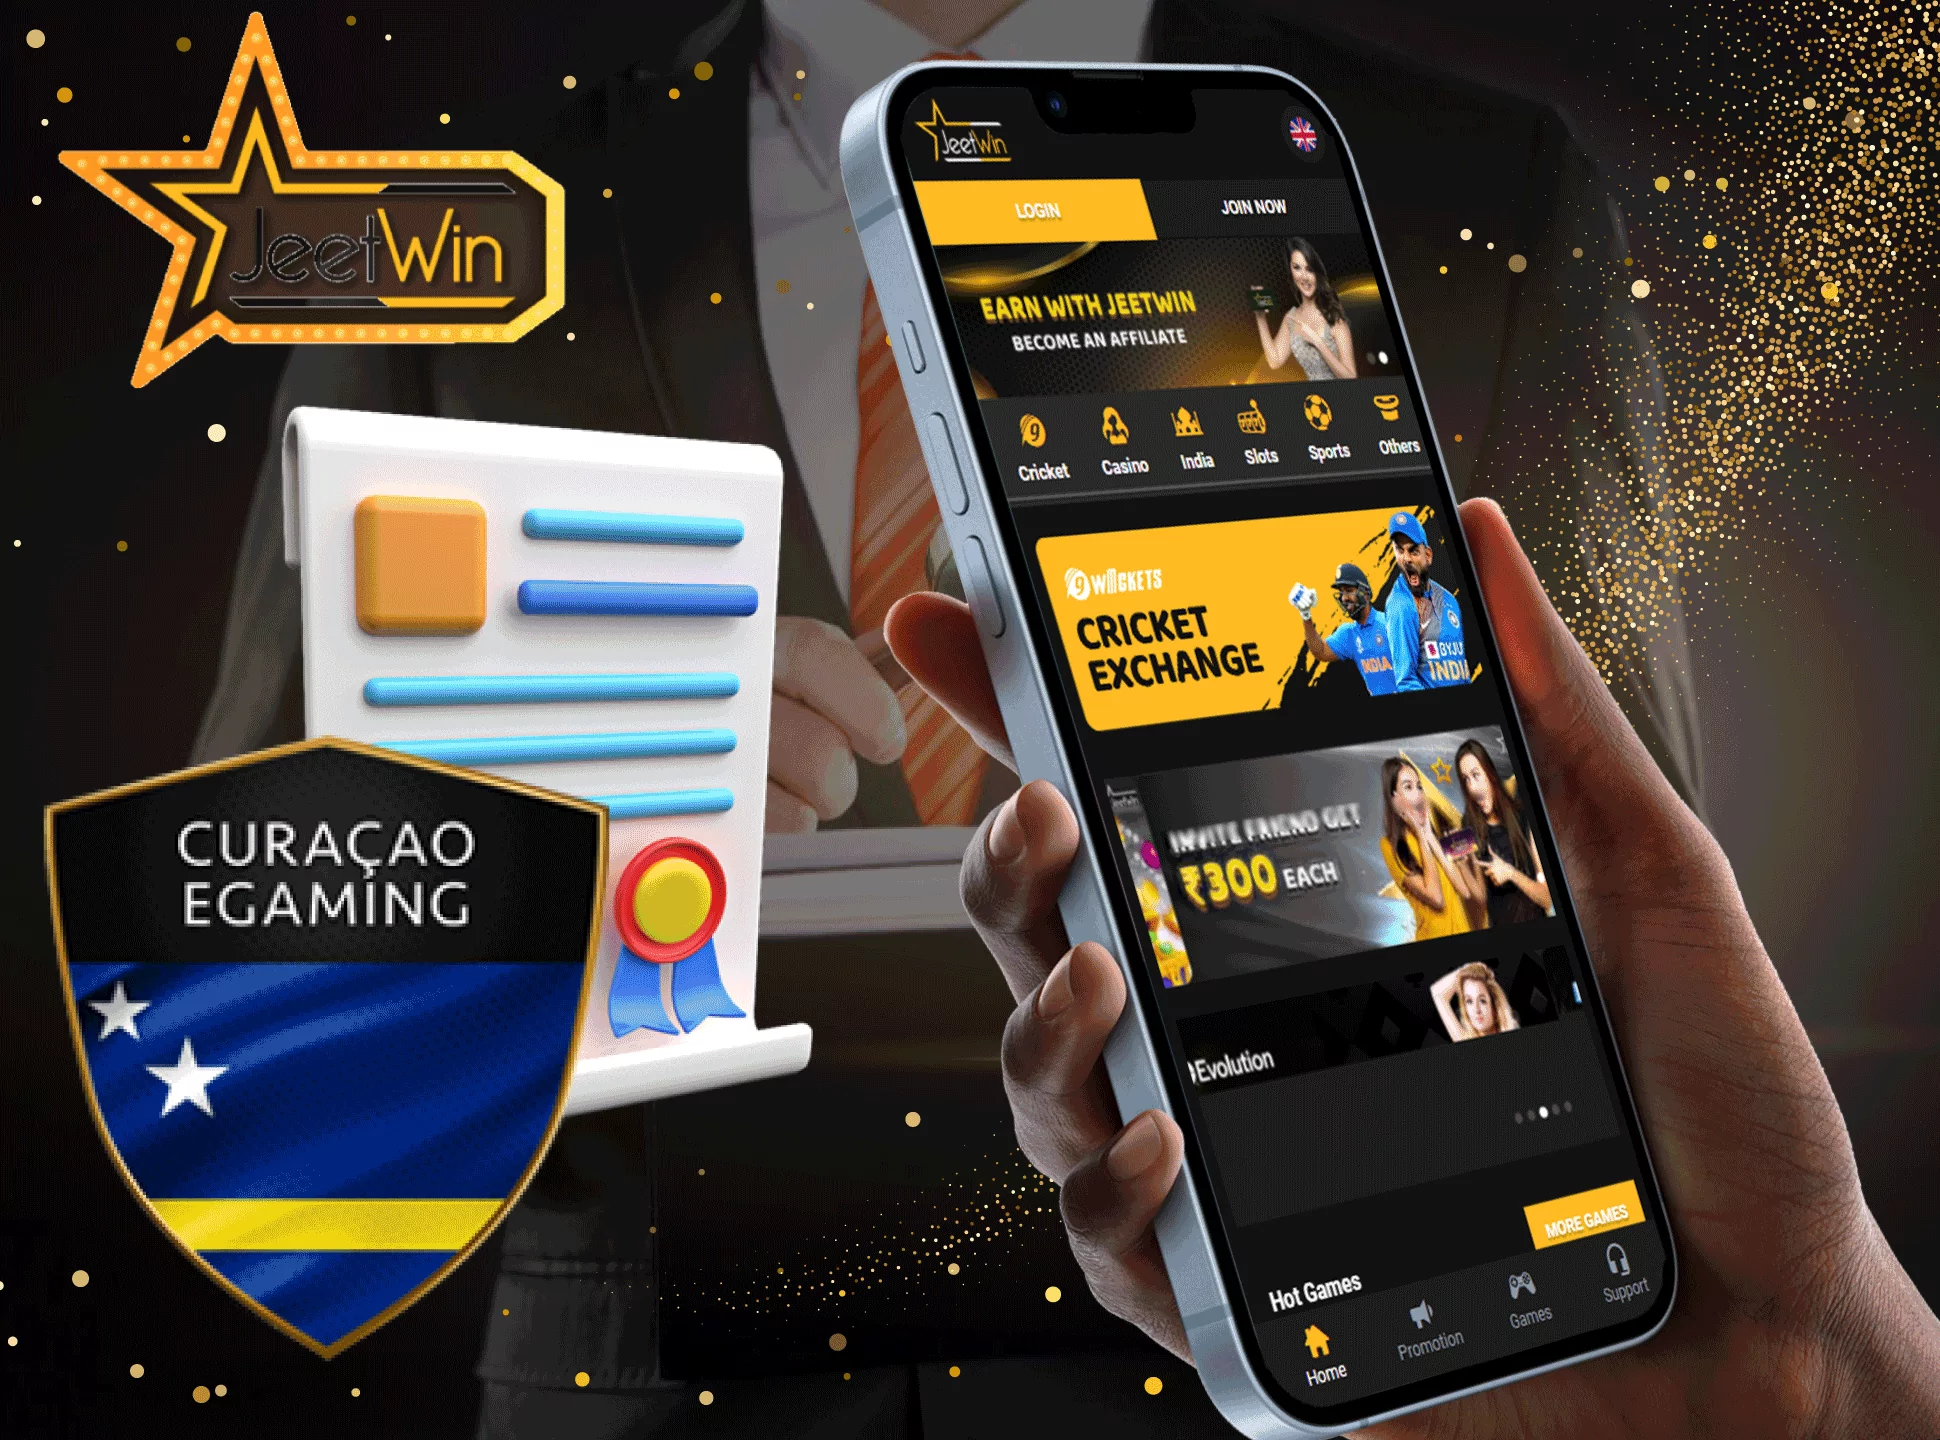 Jeetwin official website provides the iser with all the neccessary information and full pack of the gambling entertainment.